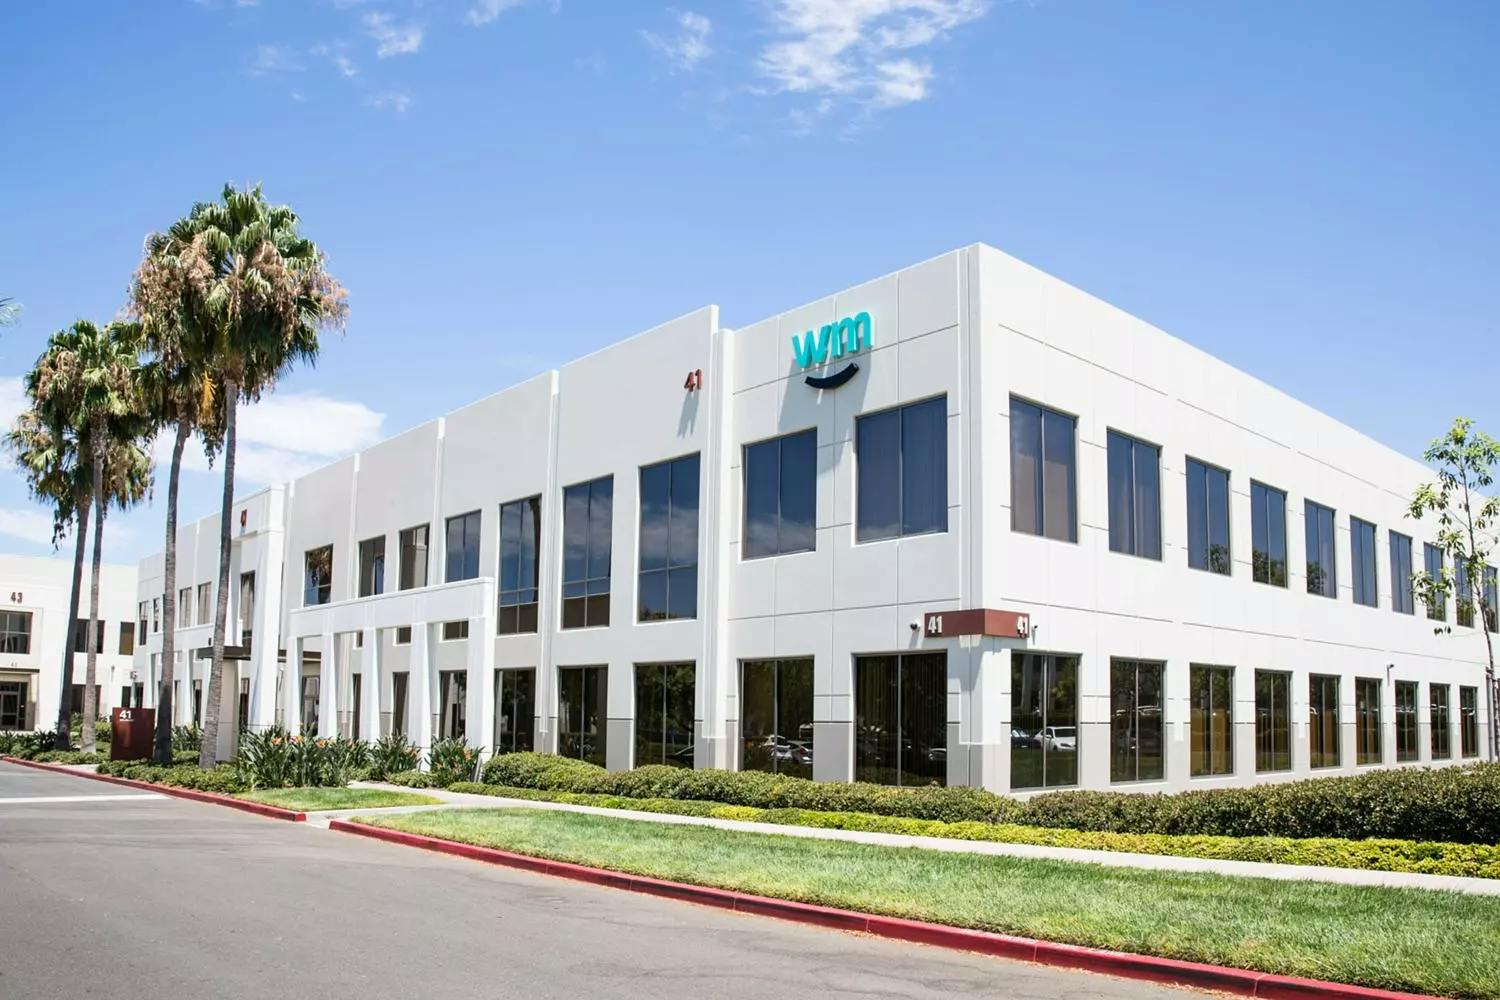 Picture of Weedmaps HQ in Irvine, California.